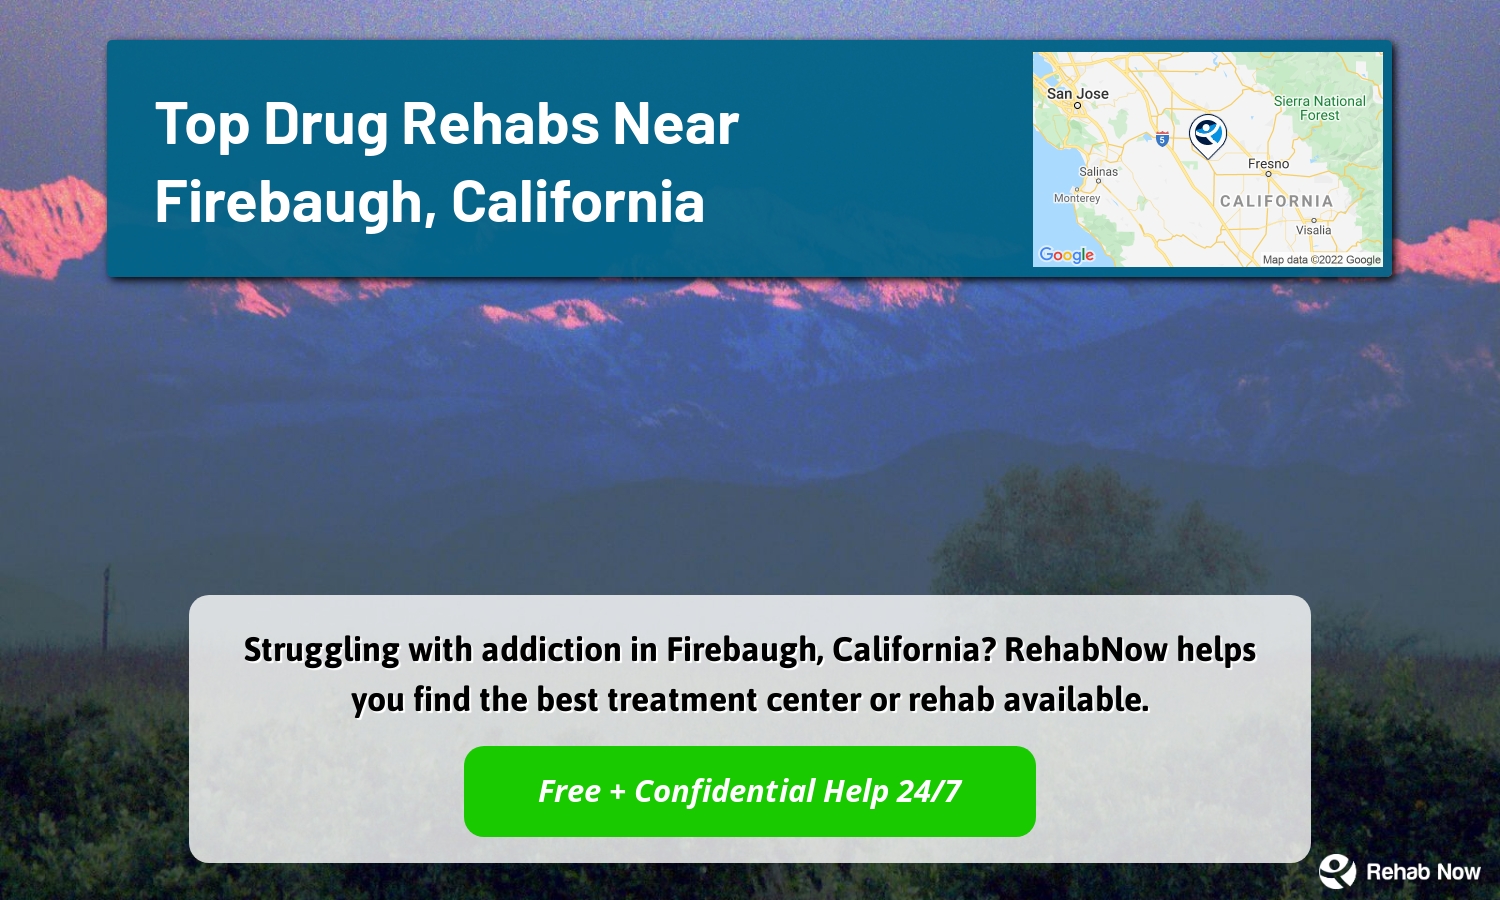 Struggling with addiction in Firebaugh, California? RehabNow helps you find the best treatment center or rehab available.